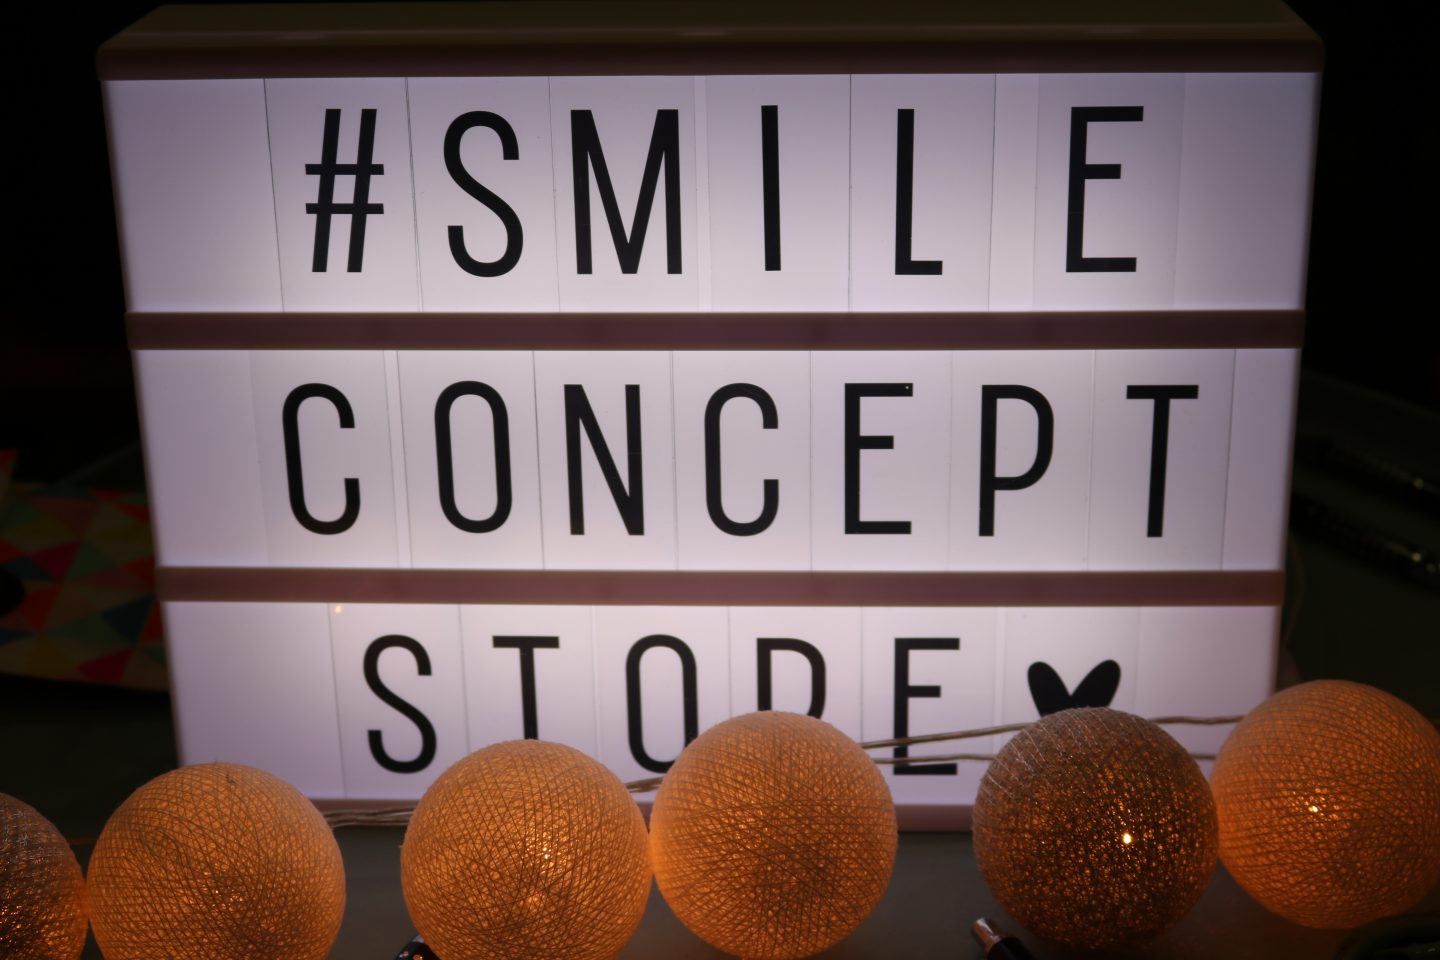 Smile concept store 2 Beautyful Bloggers MeetUp